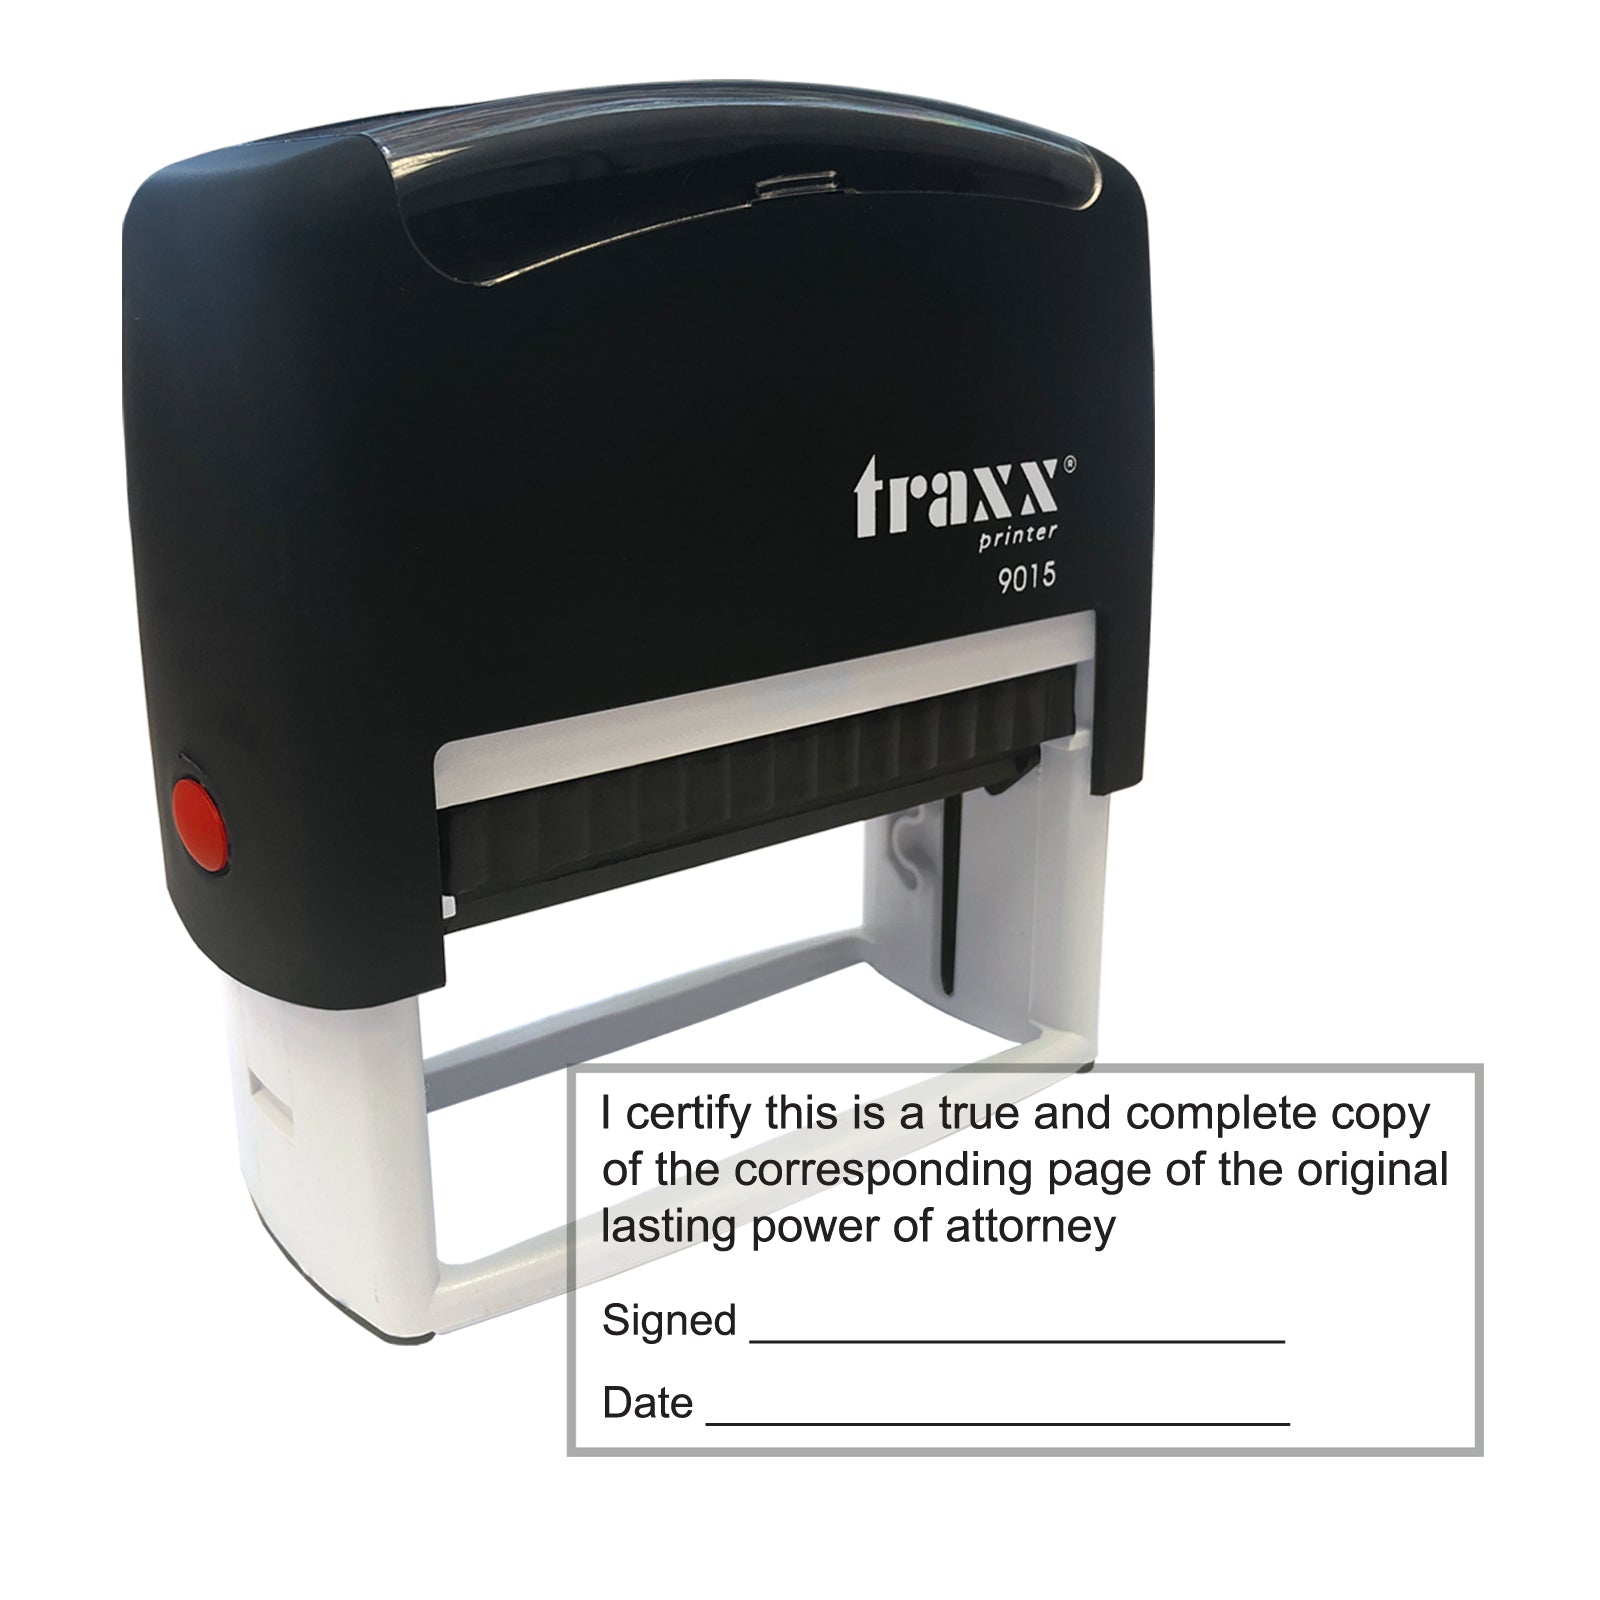 Lasting Power of Attorney Rubber Stamp - Traxx 9015 70 x 30mm